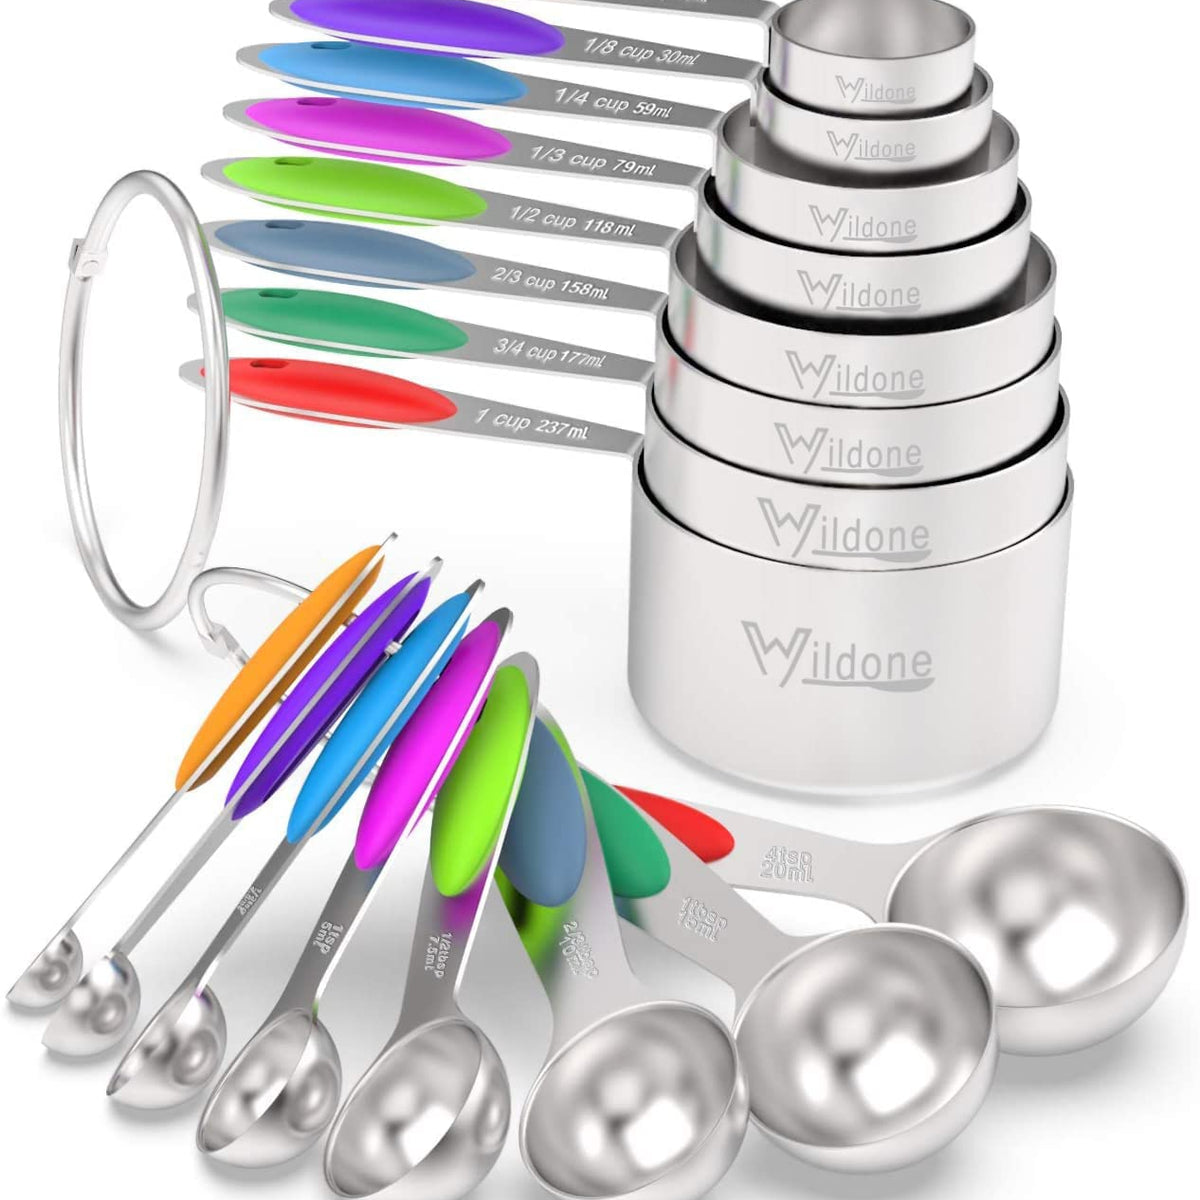 Measuring Spoons to Magnetic Measuring Spoons Set, Stackable Teaspoons  Tablespoons,Stainless Steel,Double-sided Marked,Kitchen Gadgets Set of 8  (Multicolor) 